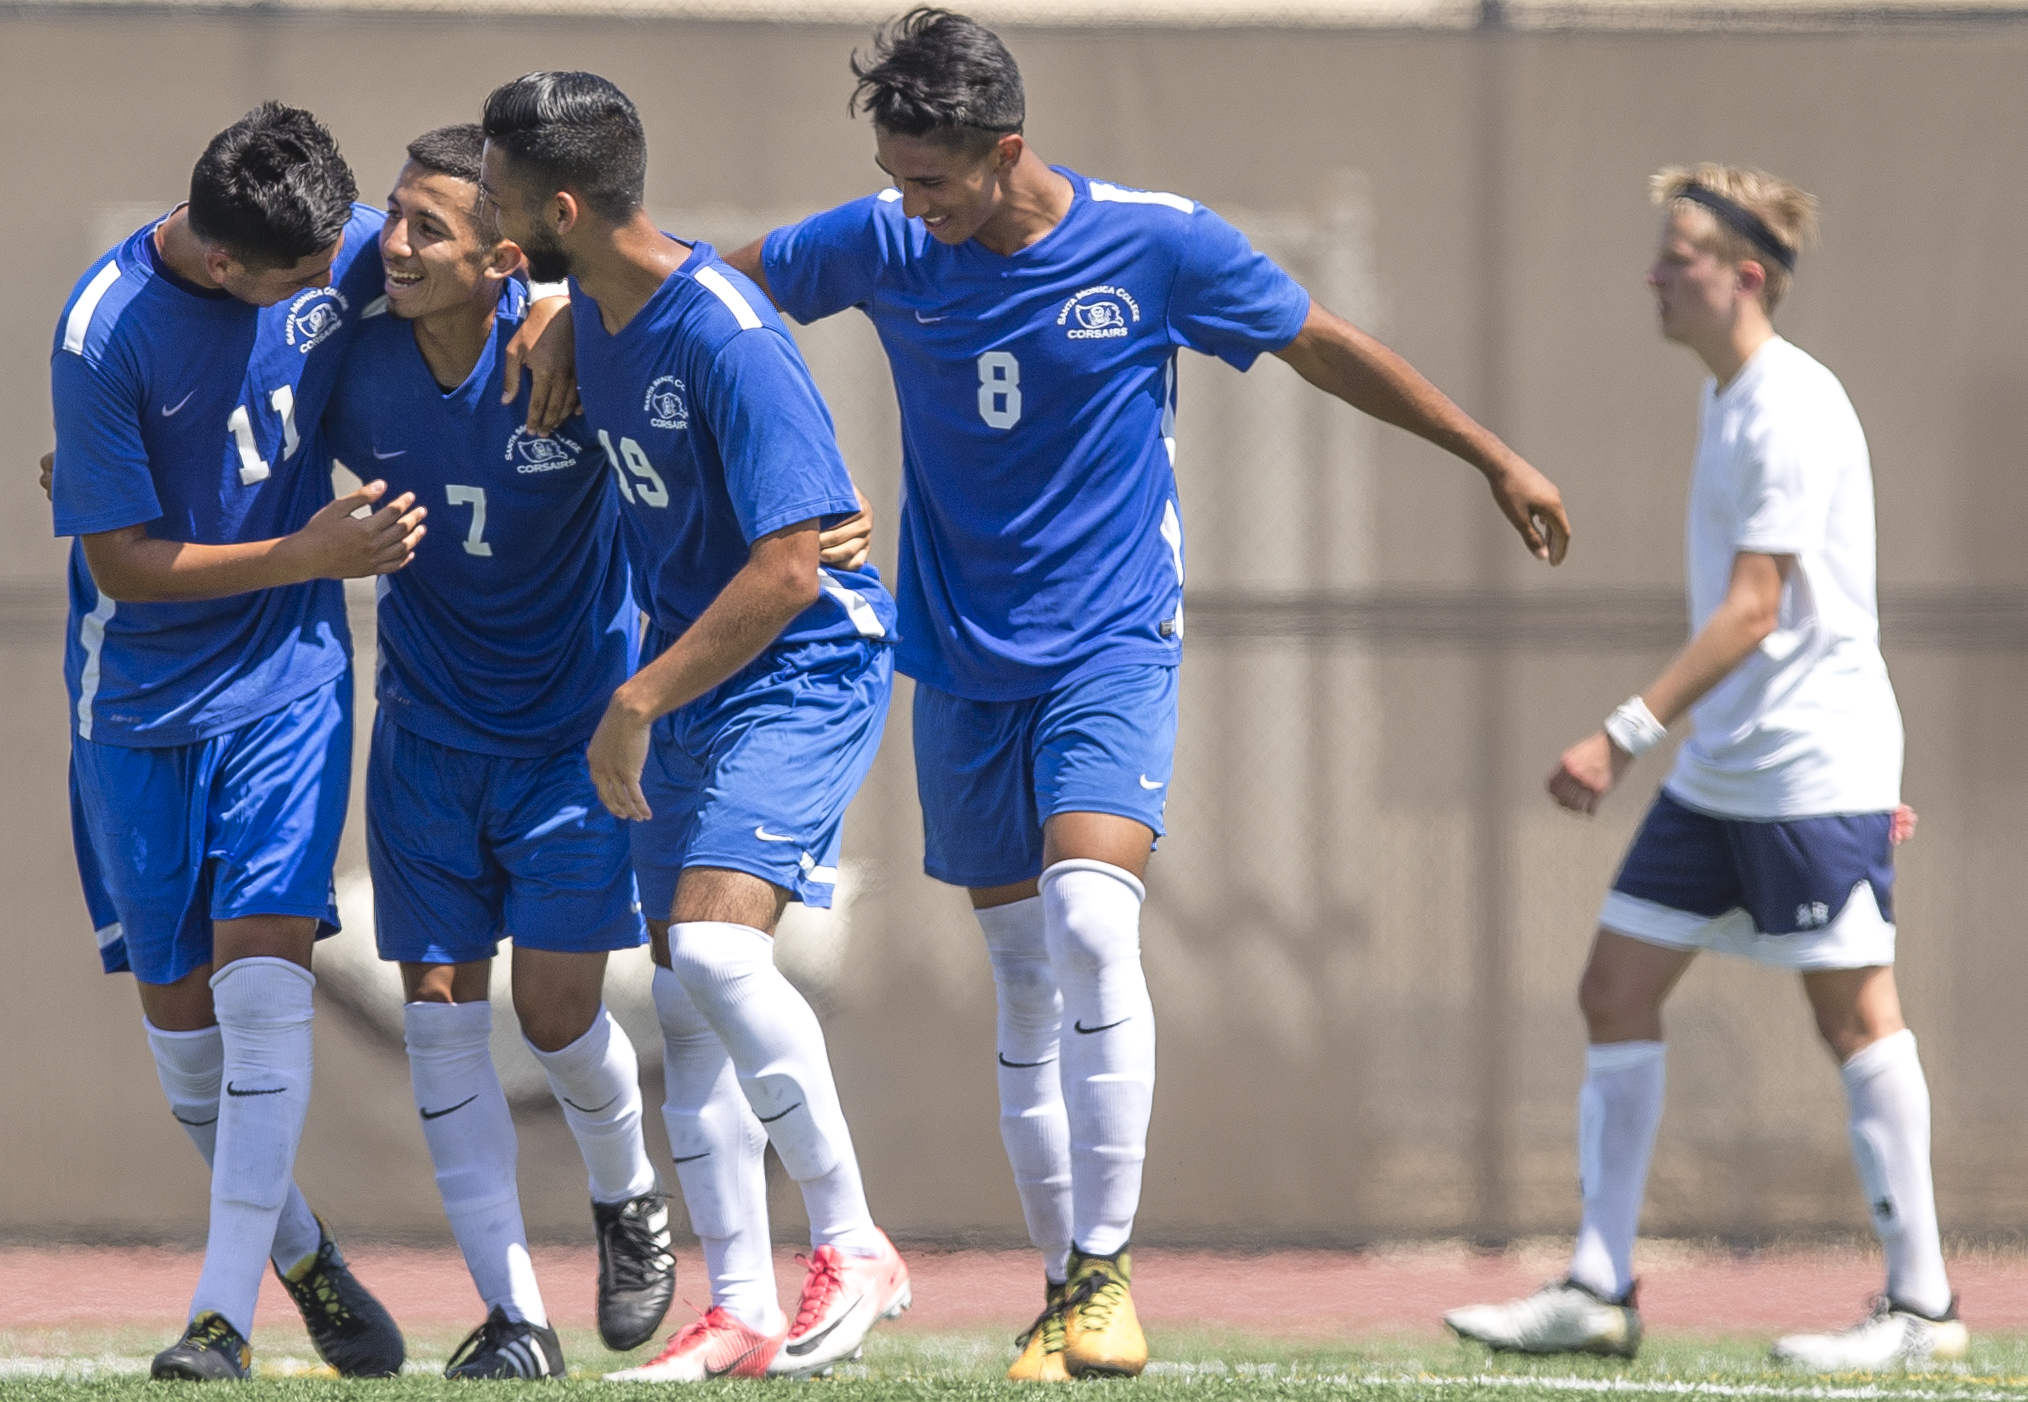  Kevin Martinez (blue,left) (7) of the Santa Monica College Corsairs mens soccer team celebrates a goal against the El Camino College Warriors with his teamates, Friday, September 1st, 2017, at the Santa Monica College Main Campus field in Santa Moni